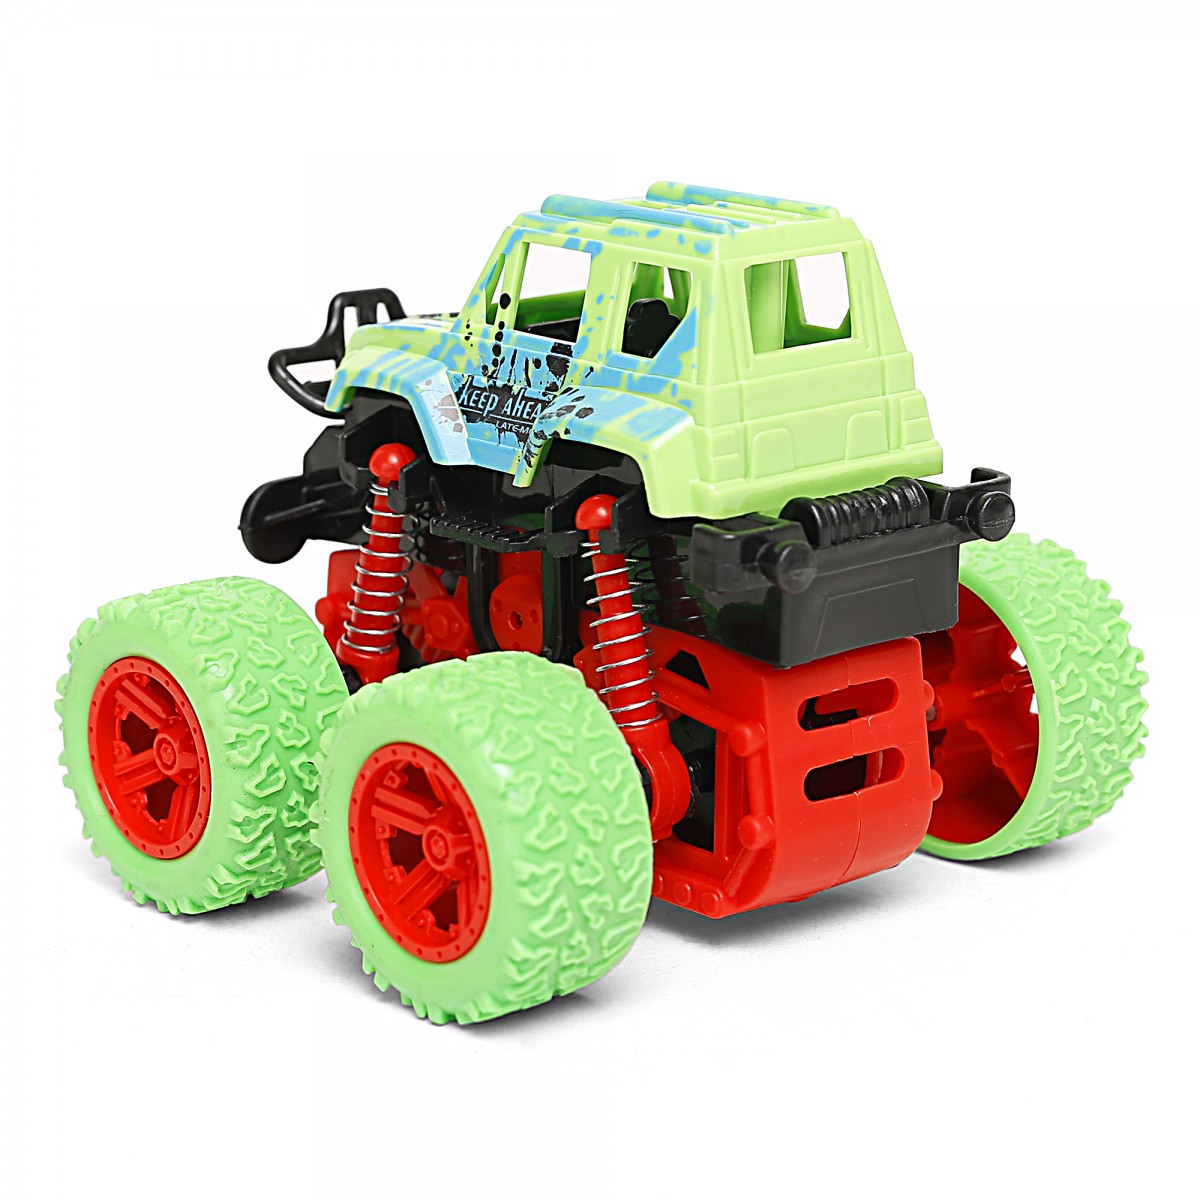 Ralleyz Friction Toy Car With Grip Wheels 4 Wheel Drive Force Amazing Kids Play Mini Toy Car Green 6Y+